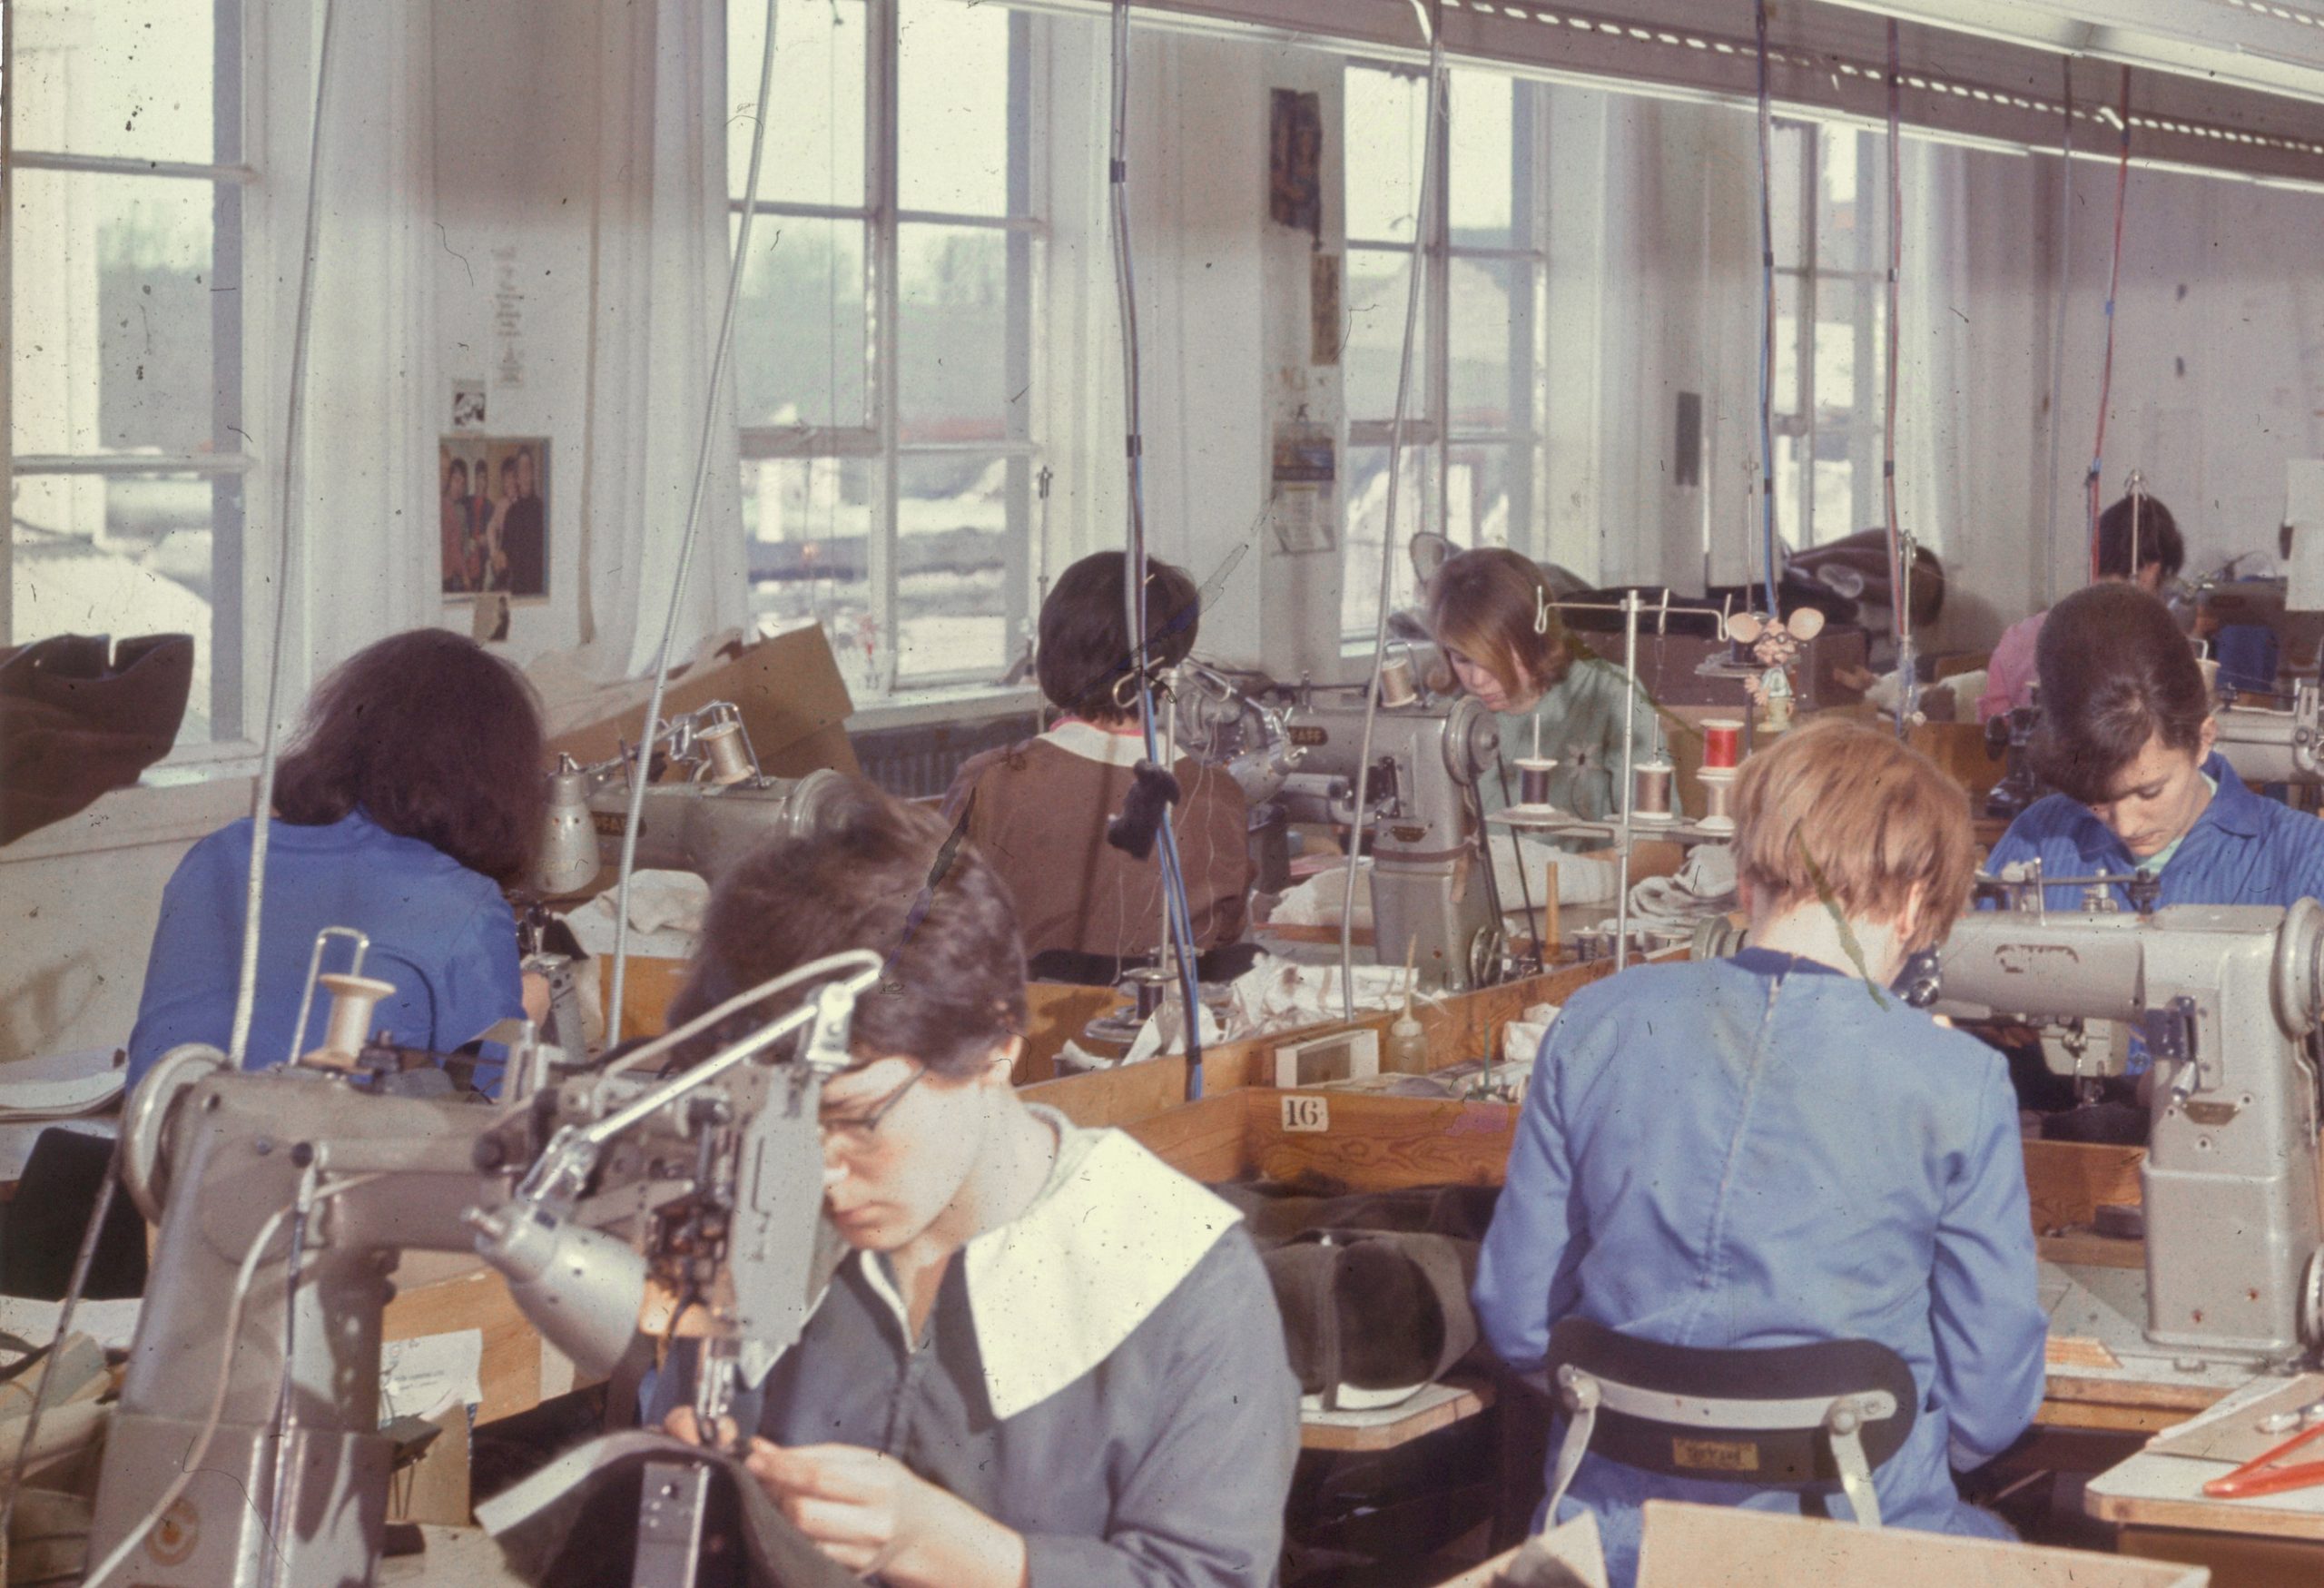 Machinists in the closing room, Morlands, 1977
Photo: Howard Stone